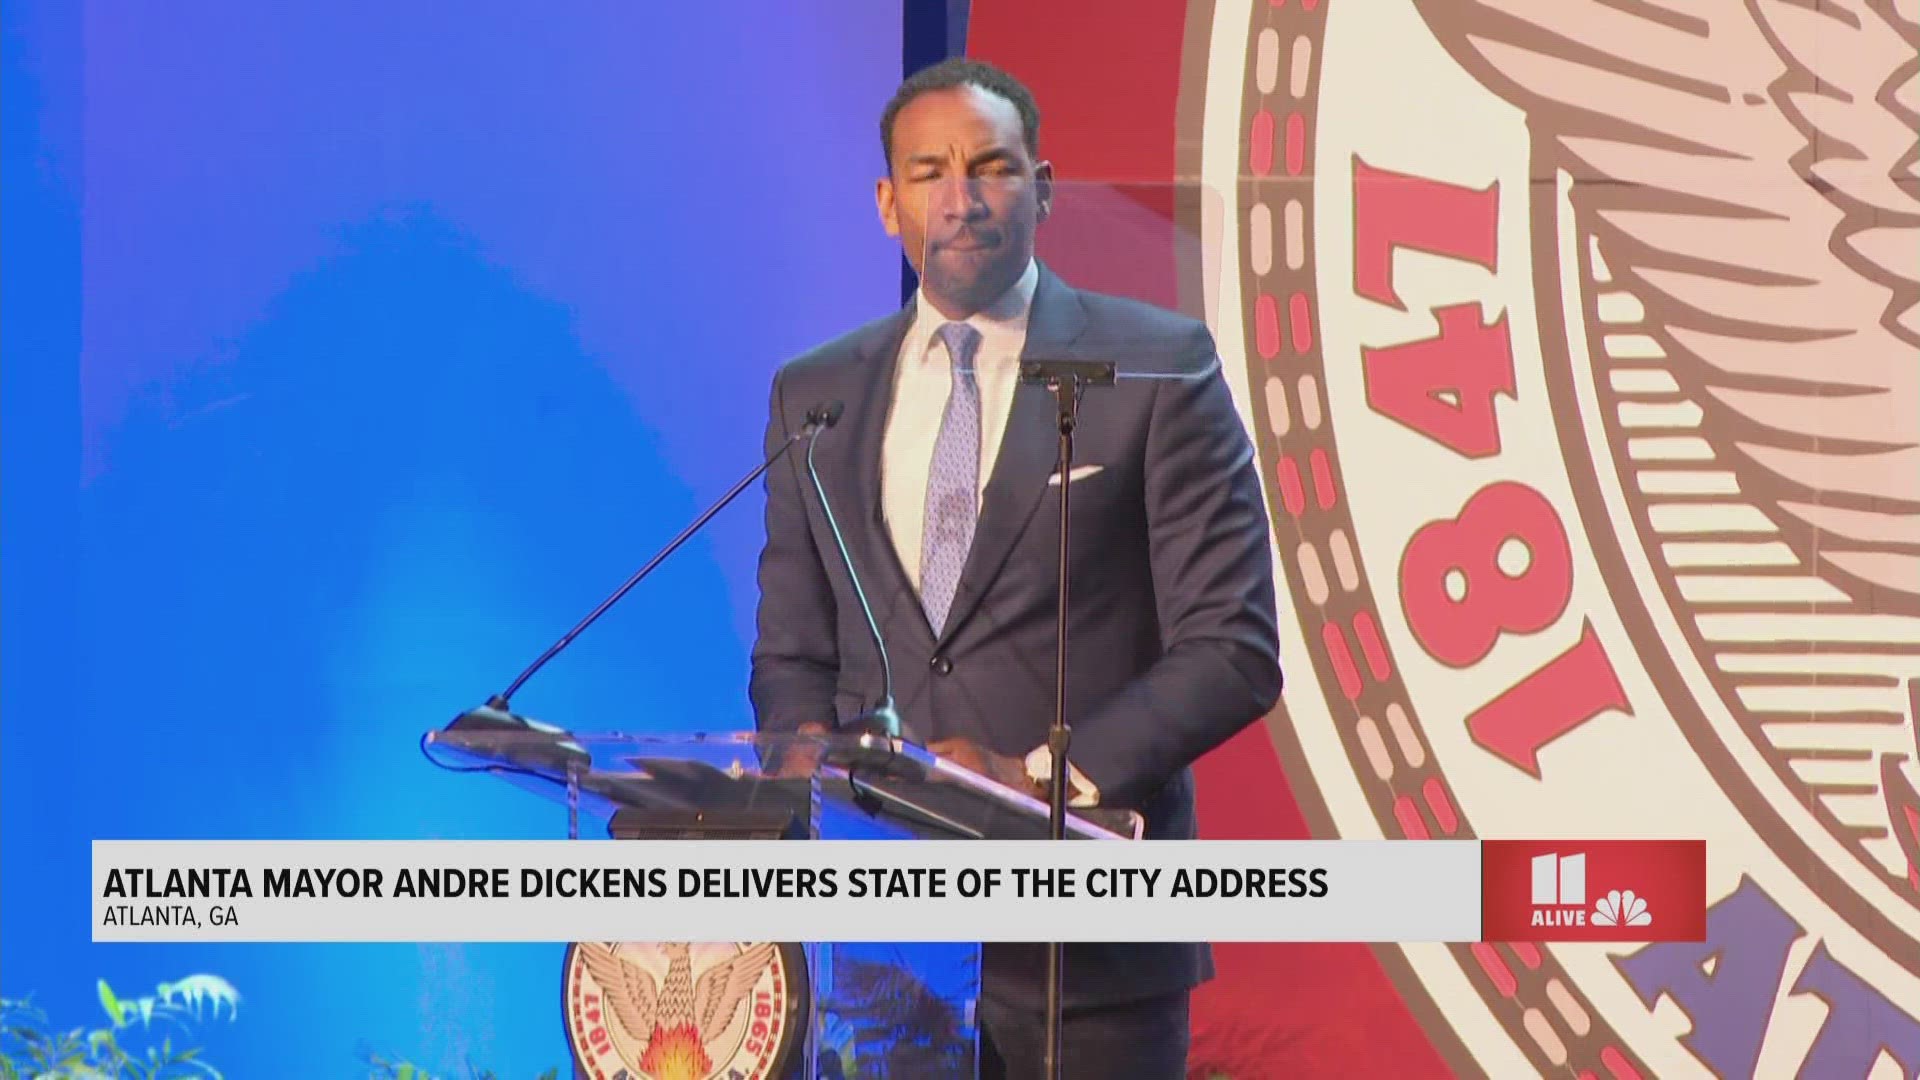 The program was announced during Mayor Andre Dickens' State of the City address.